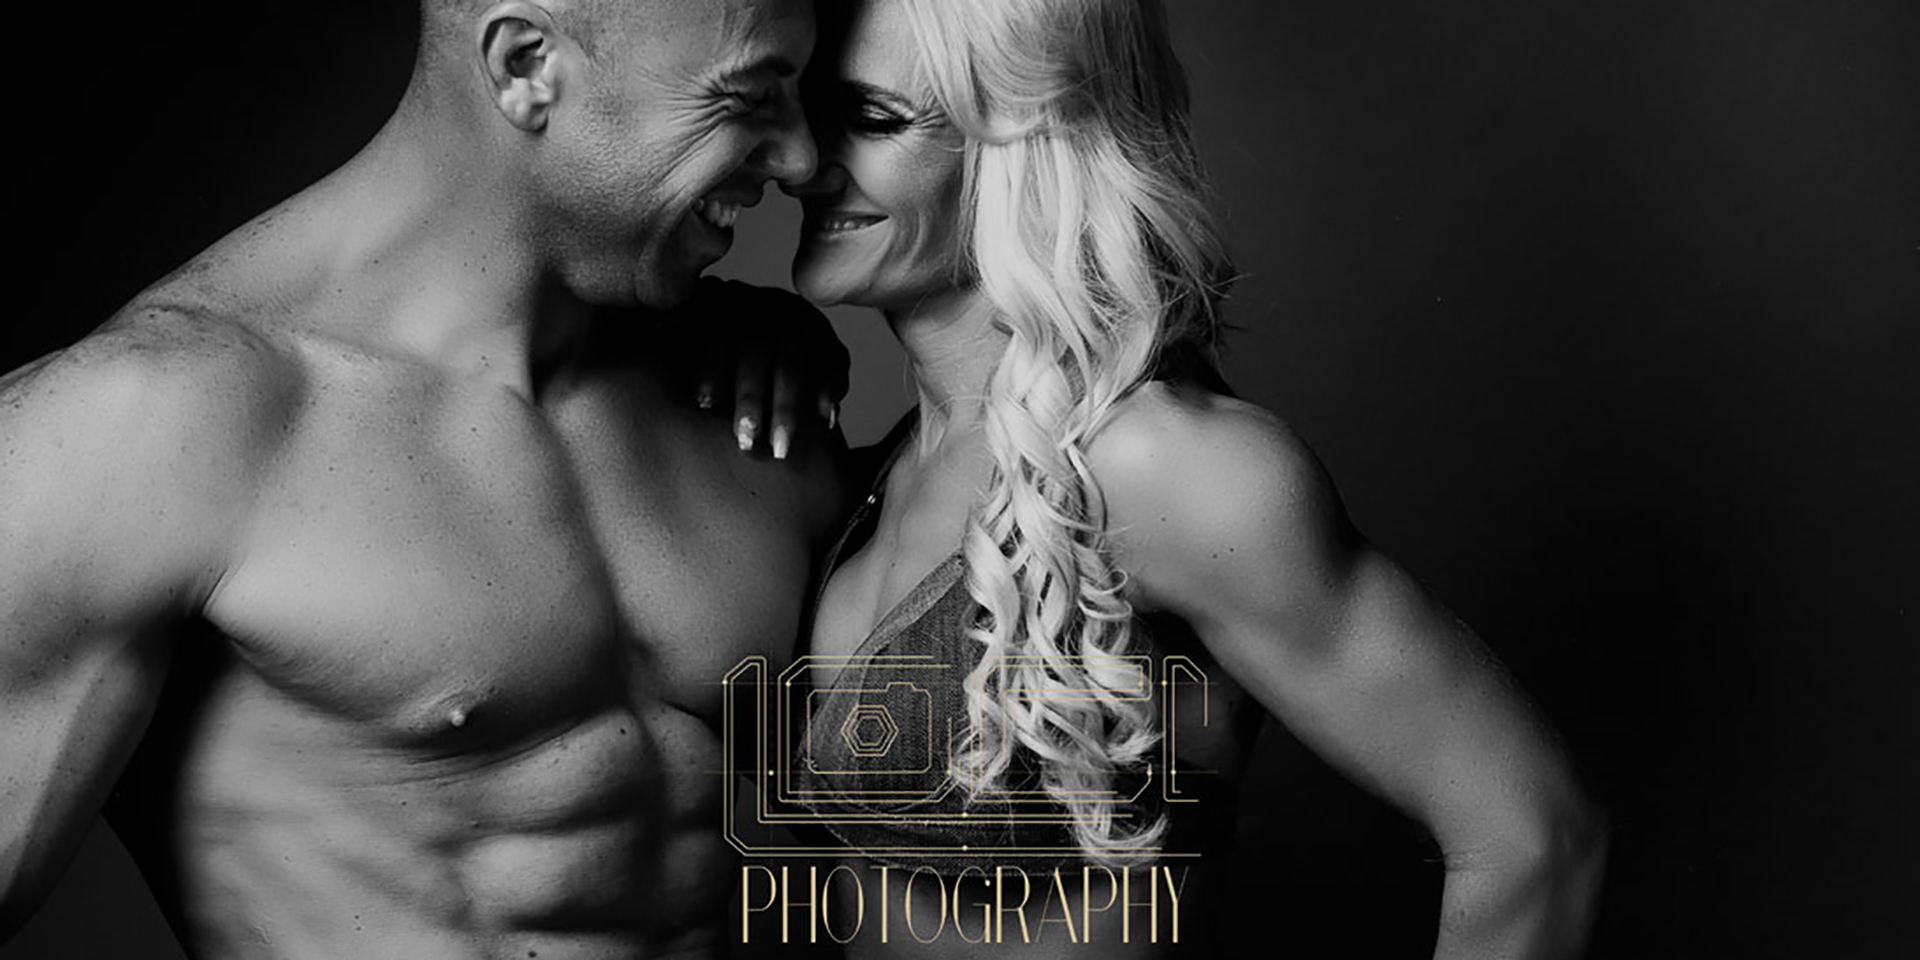 Fitness photography done professionally in studio for couples by Loci Photography in Pretoria